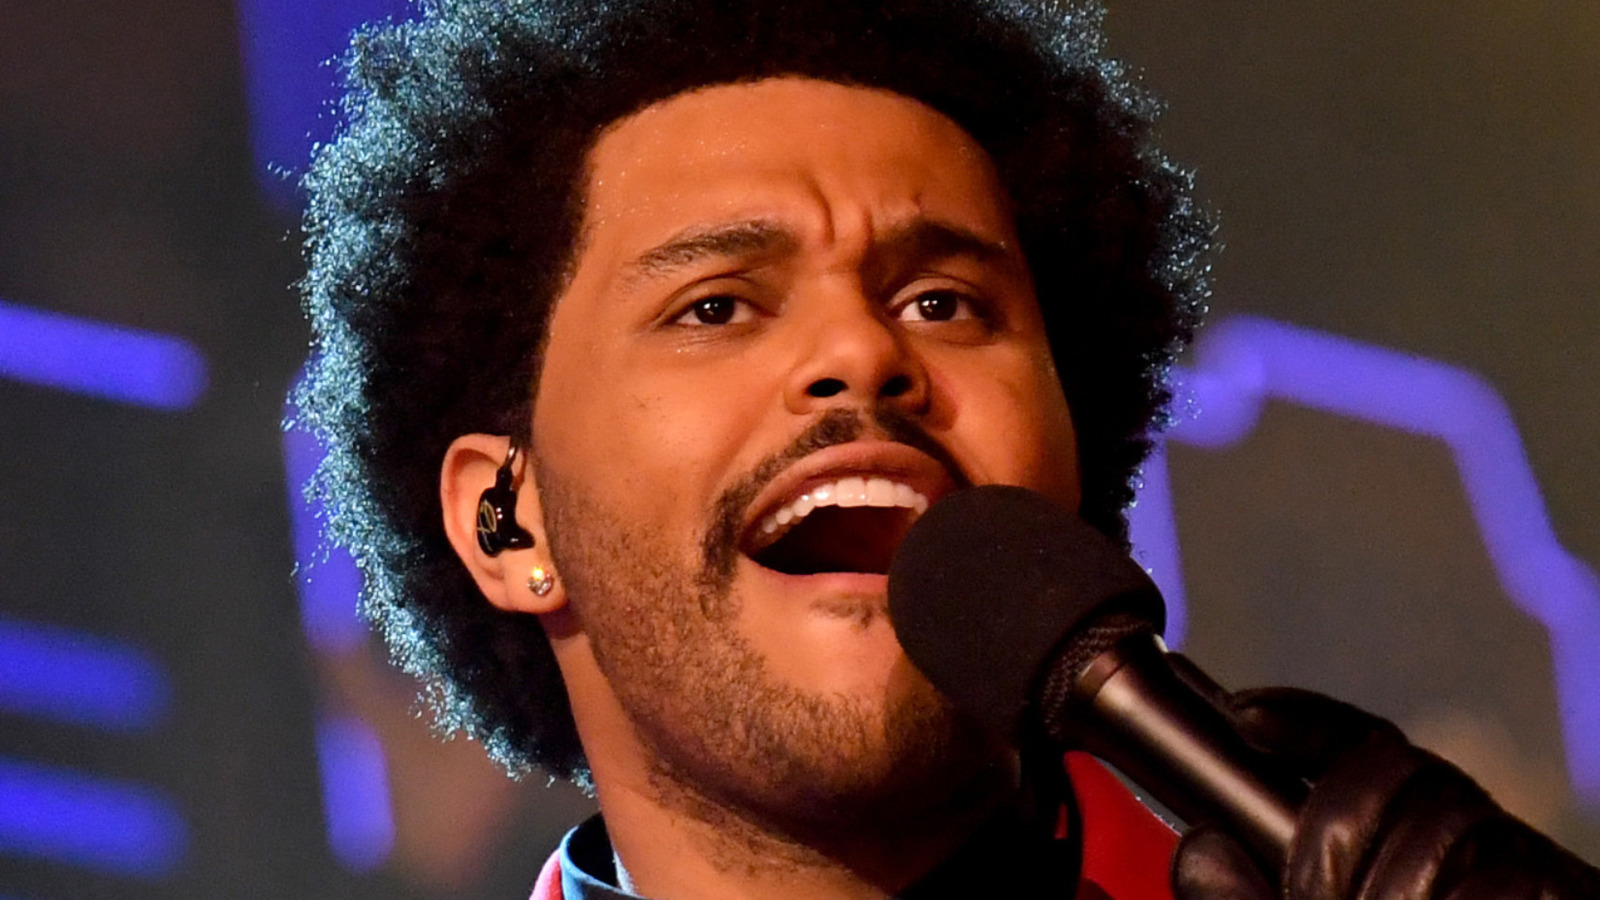 Why The Weeknd Wore Face Bandages - The Weeknd's Bruises, Explained